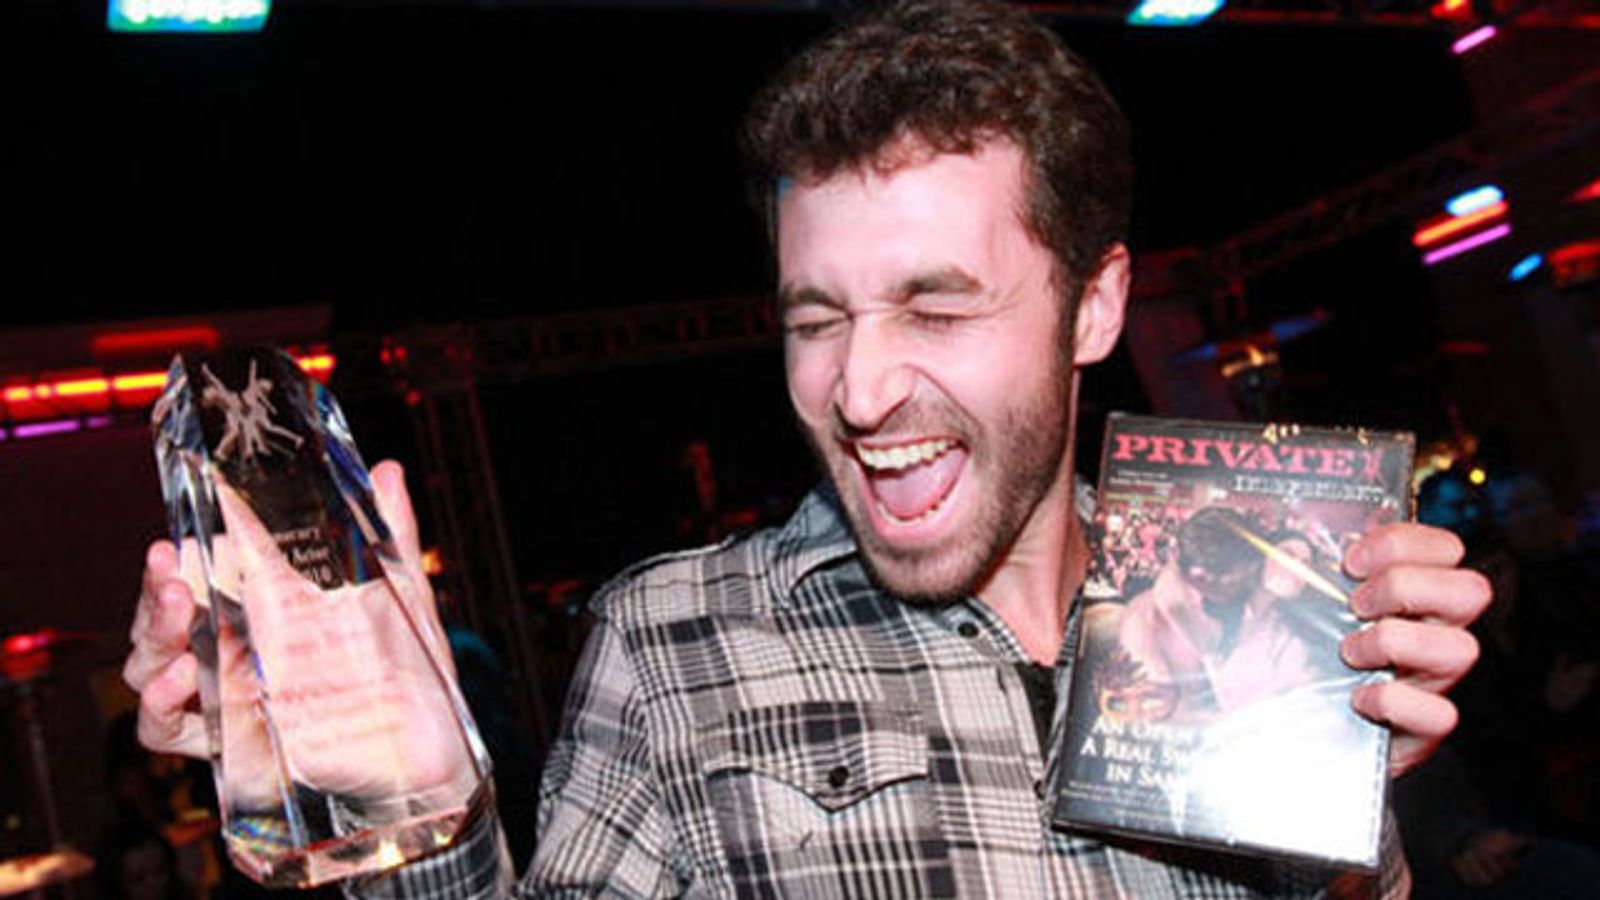 E! Online Reveals 5 Things About James Deen